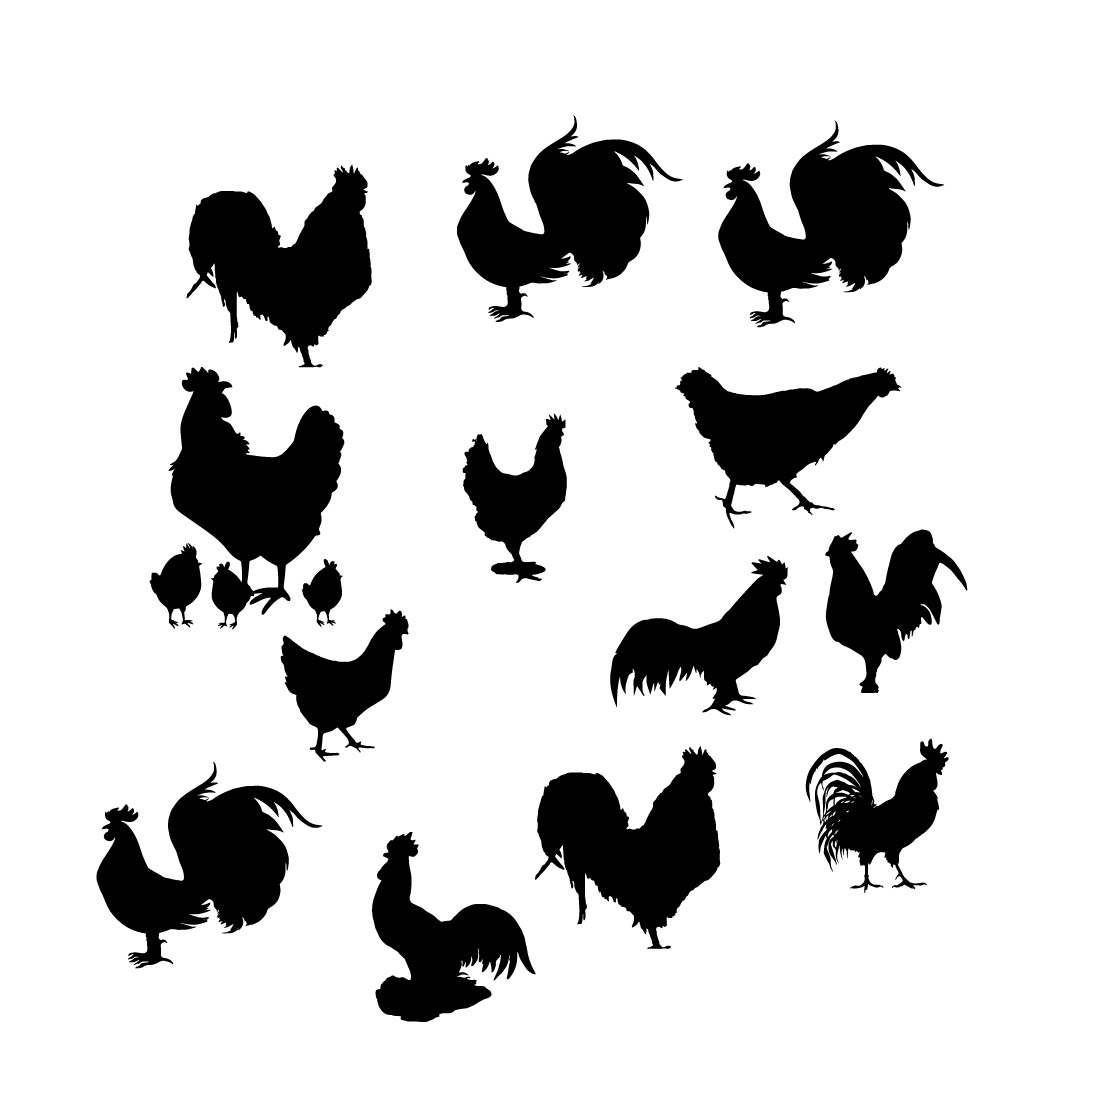 Chicken silhouette set preview image.